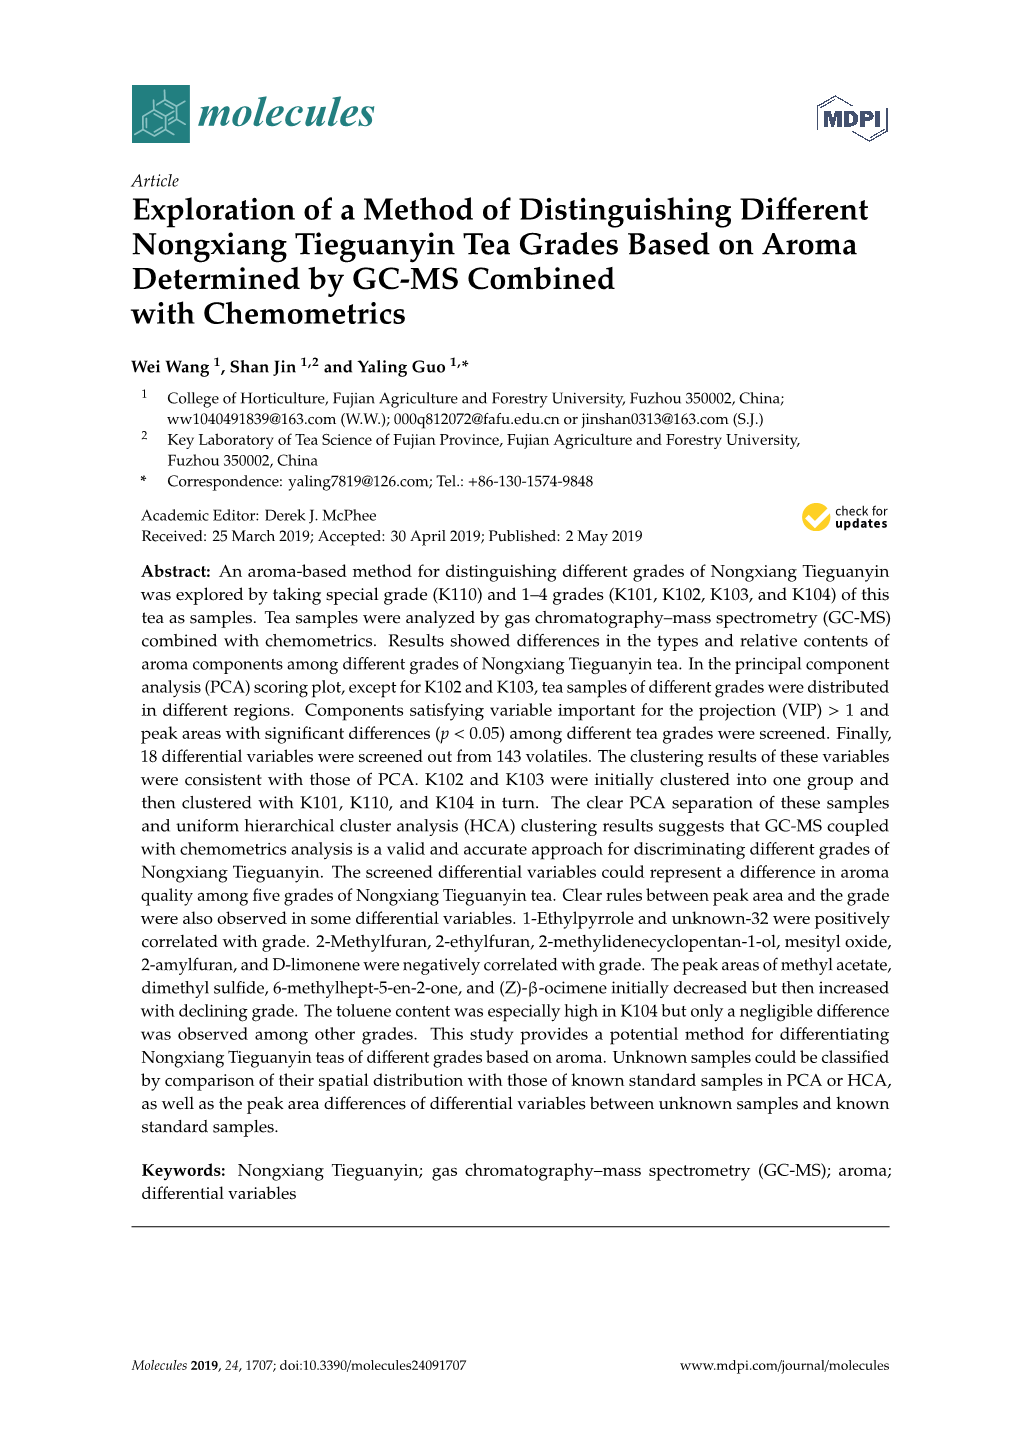 Exploration of a Method of Distinguishing Different Nongxiang Tieguanyin Tea Grades Based on Aroma Determined by GC-MS Combined with Chemometrics